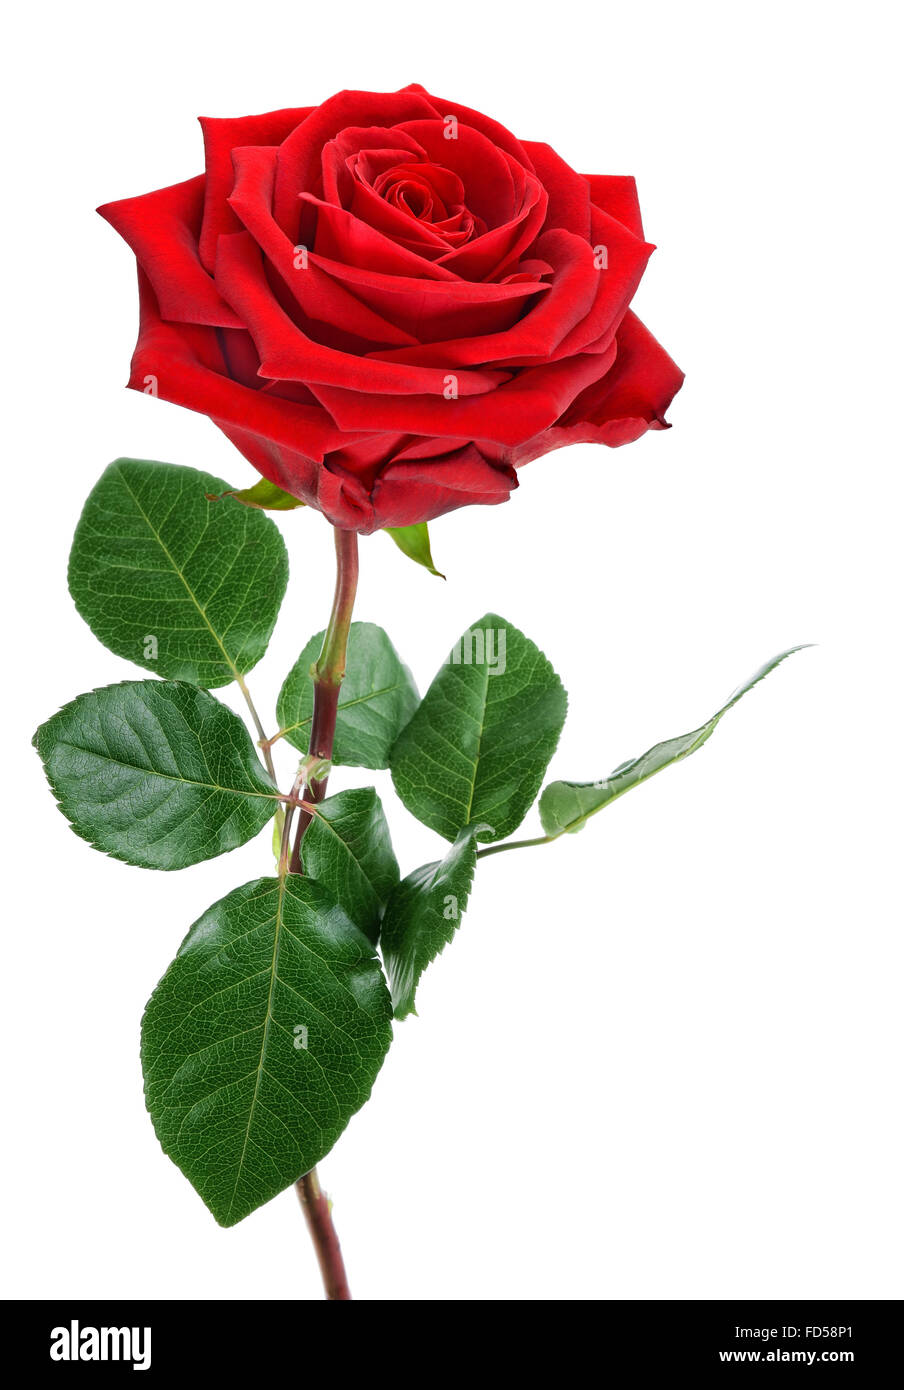 Fully blossomed, perfect red rose with stem and leaves, studio isolated on pure white background Stock Photo